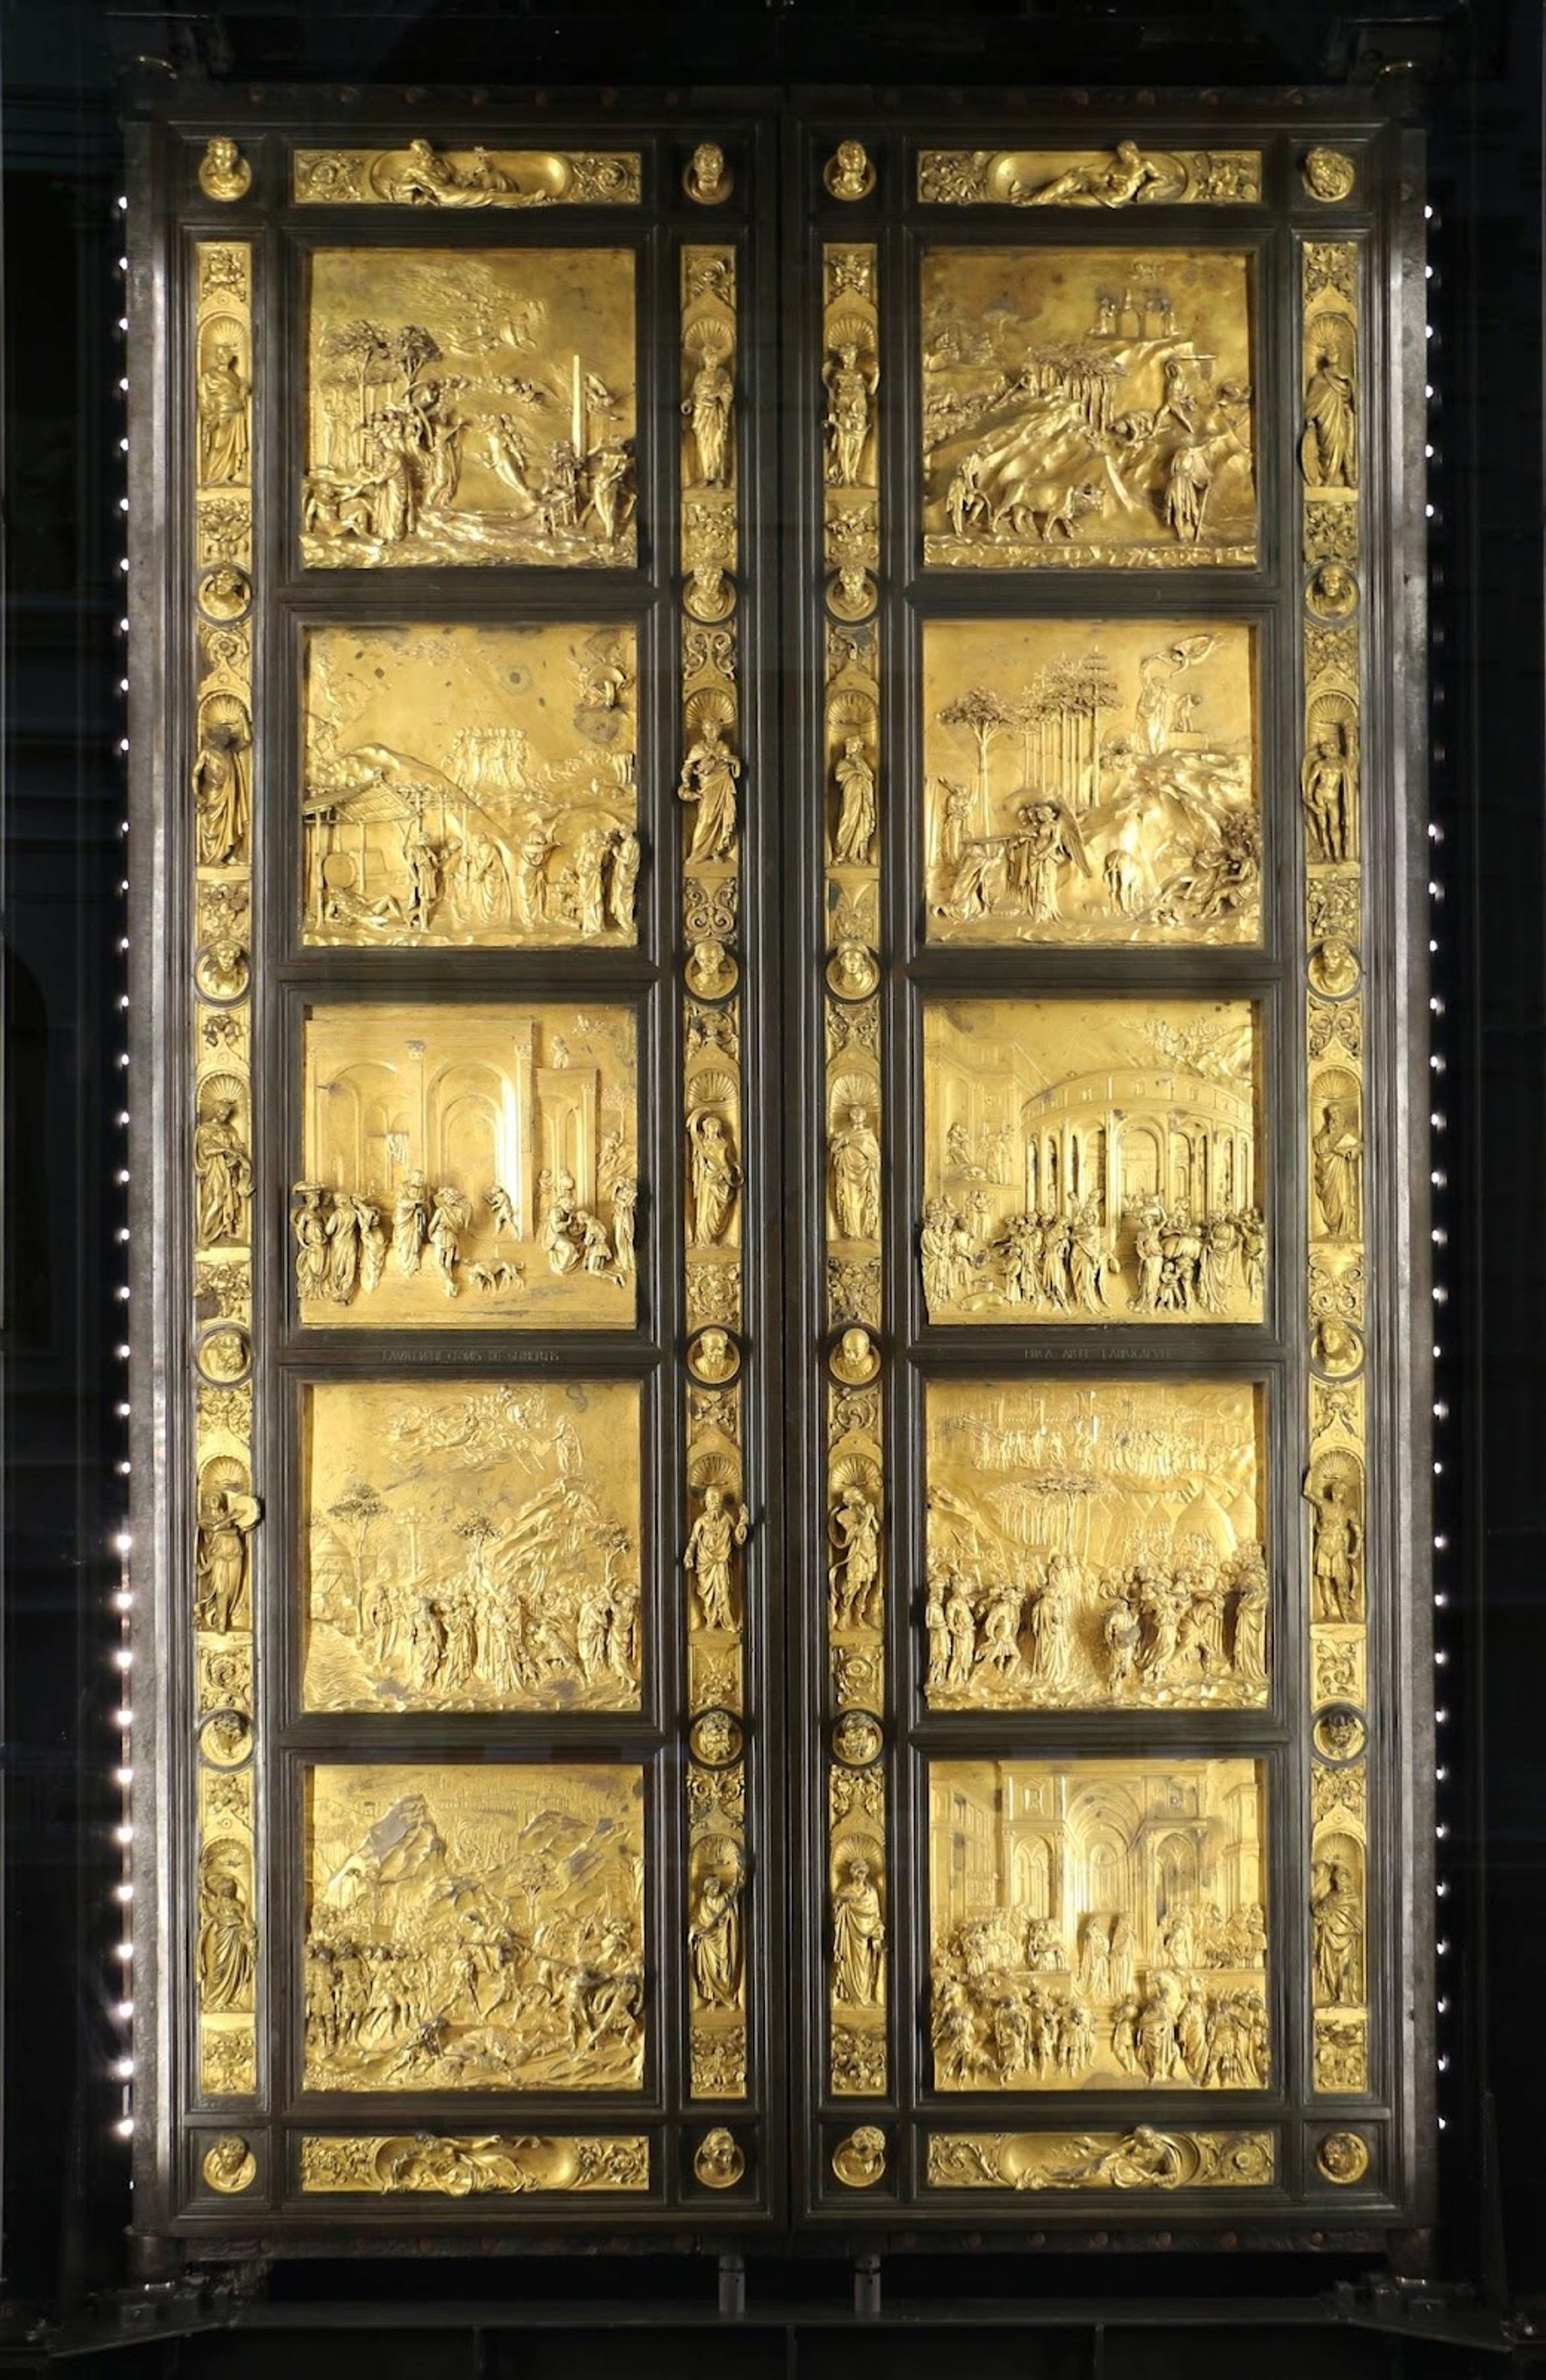 A photograph of The Gates Of Paradise (1452) by Lorenzo Ghiberti, a set of large bronze doors intricately depicting biblical scenes.